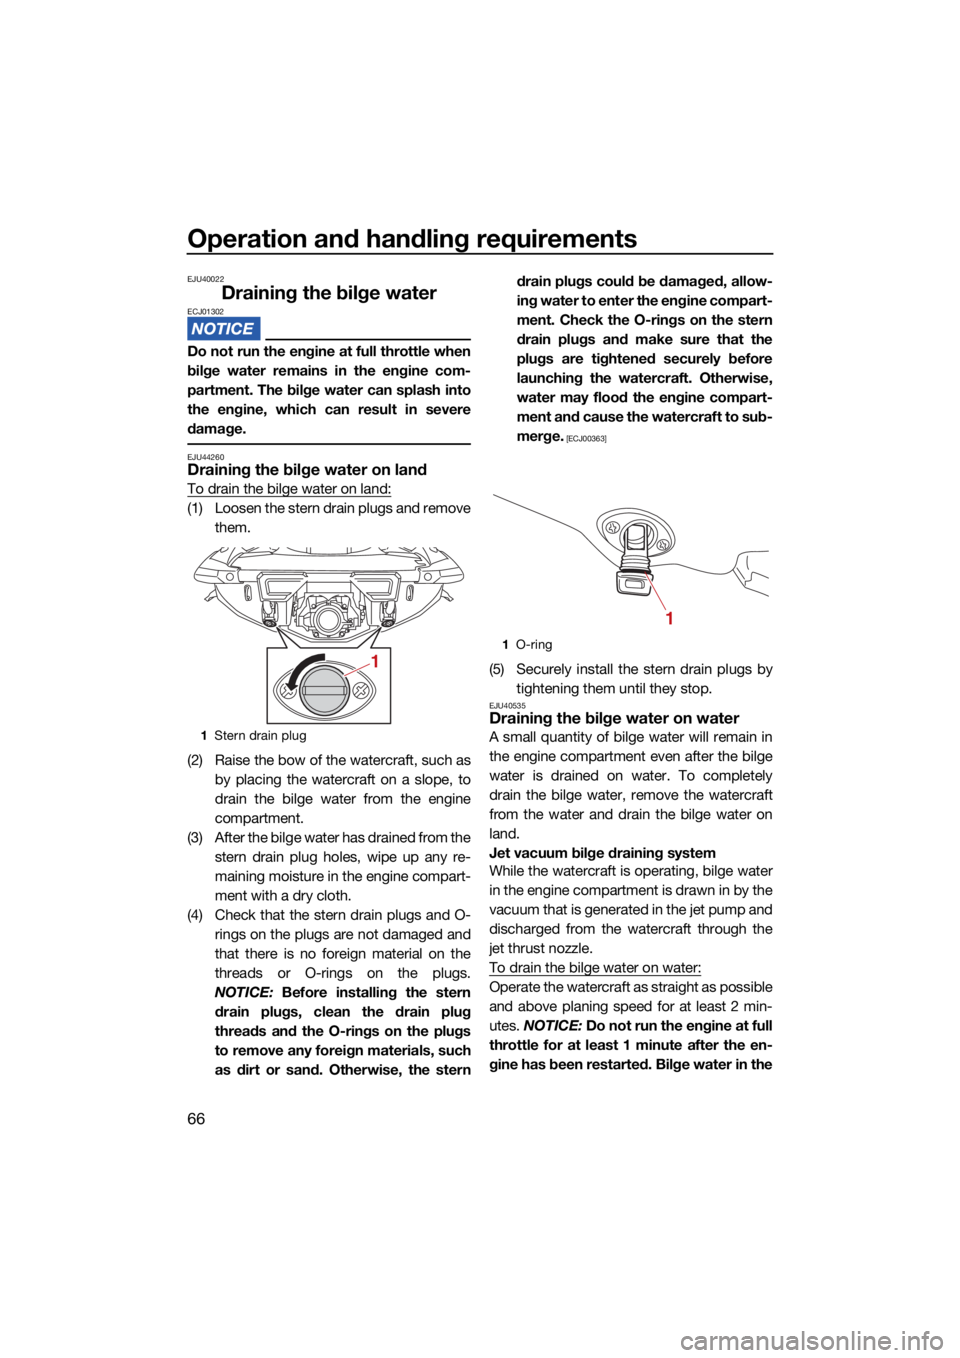 YAMAHA VX CRUISER 2021  Owners Manual Operation and handling requirements
66
EJU40022
Draining the bilge waterECJ01302
Do not run the engine at full throttle when
bilge water remains in the engine com-
partment. The bilge water can splash